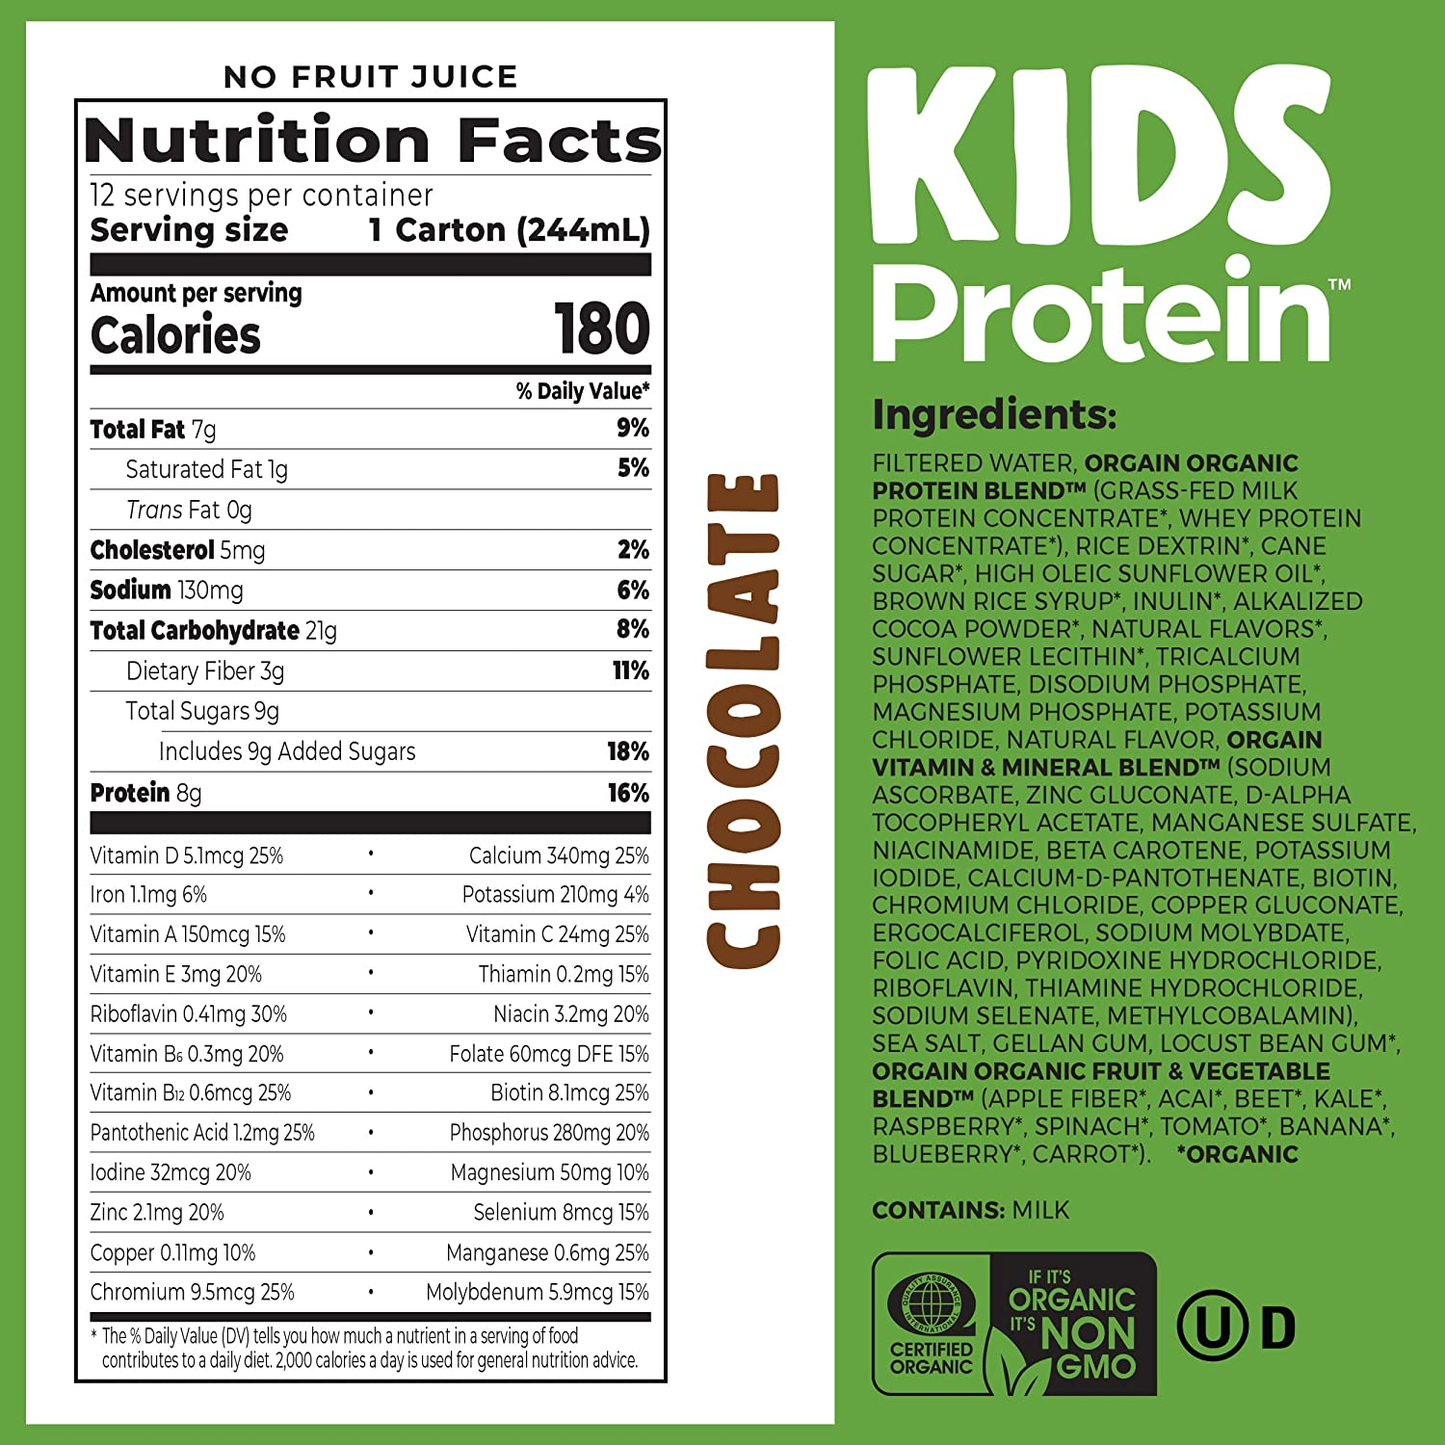 Orgain Organic Kids Protein Nutritional Shake, Chocolate - 8G of Protein, 22 Vitamins & Minerals, Fruits & Vegetables, Gluten Free, Soy Free, Non-Gmo, 8.25 Oz, 12 Ct (Packaging May Vary)